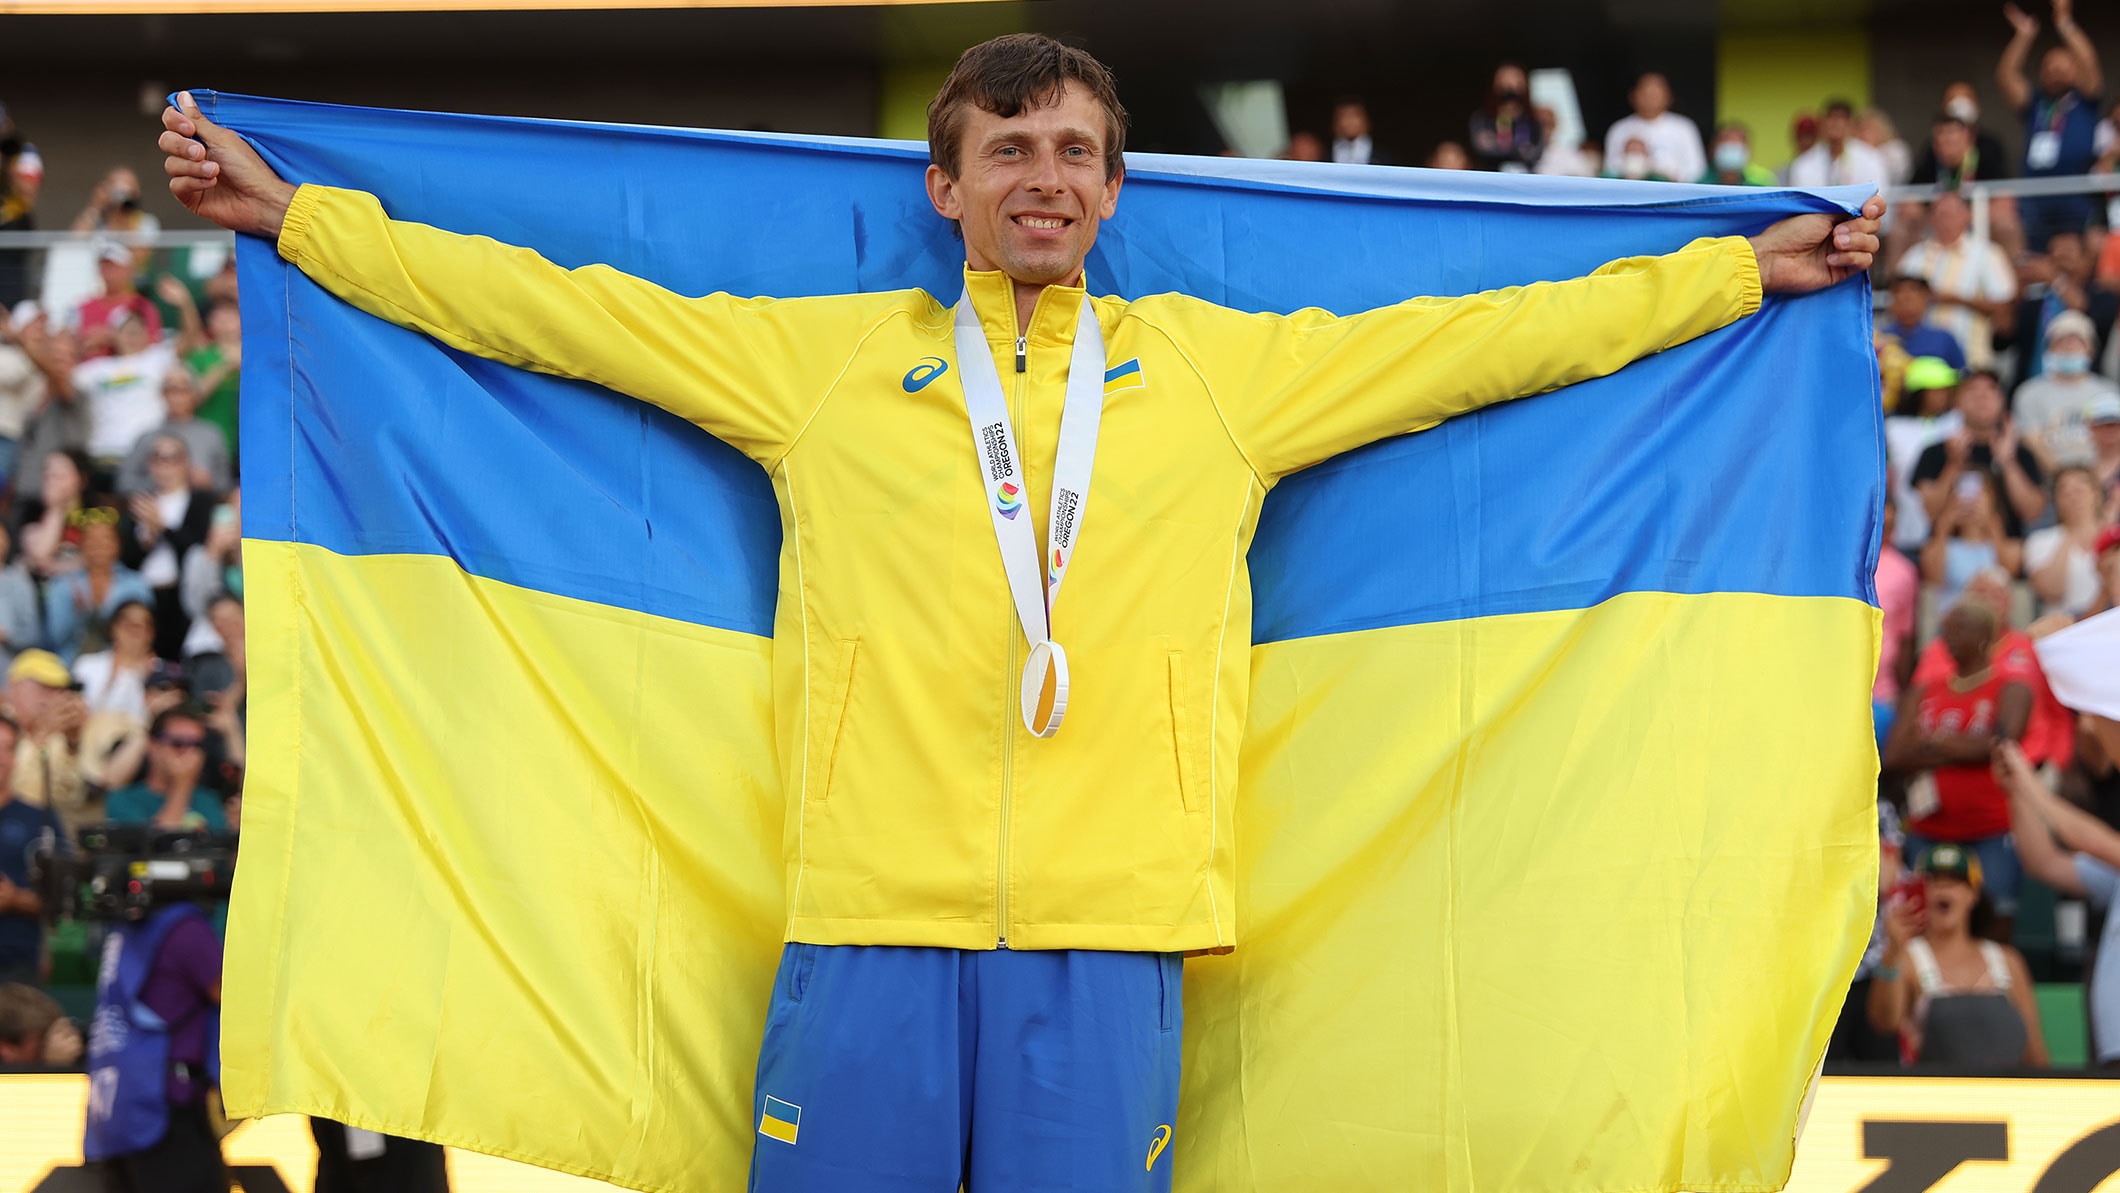 Bronze medalist Andriy Protsenko of Team Ukraine celebrates after competing in the Men's High Jump Final on day four of the World Athletics Championships Oregon22